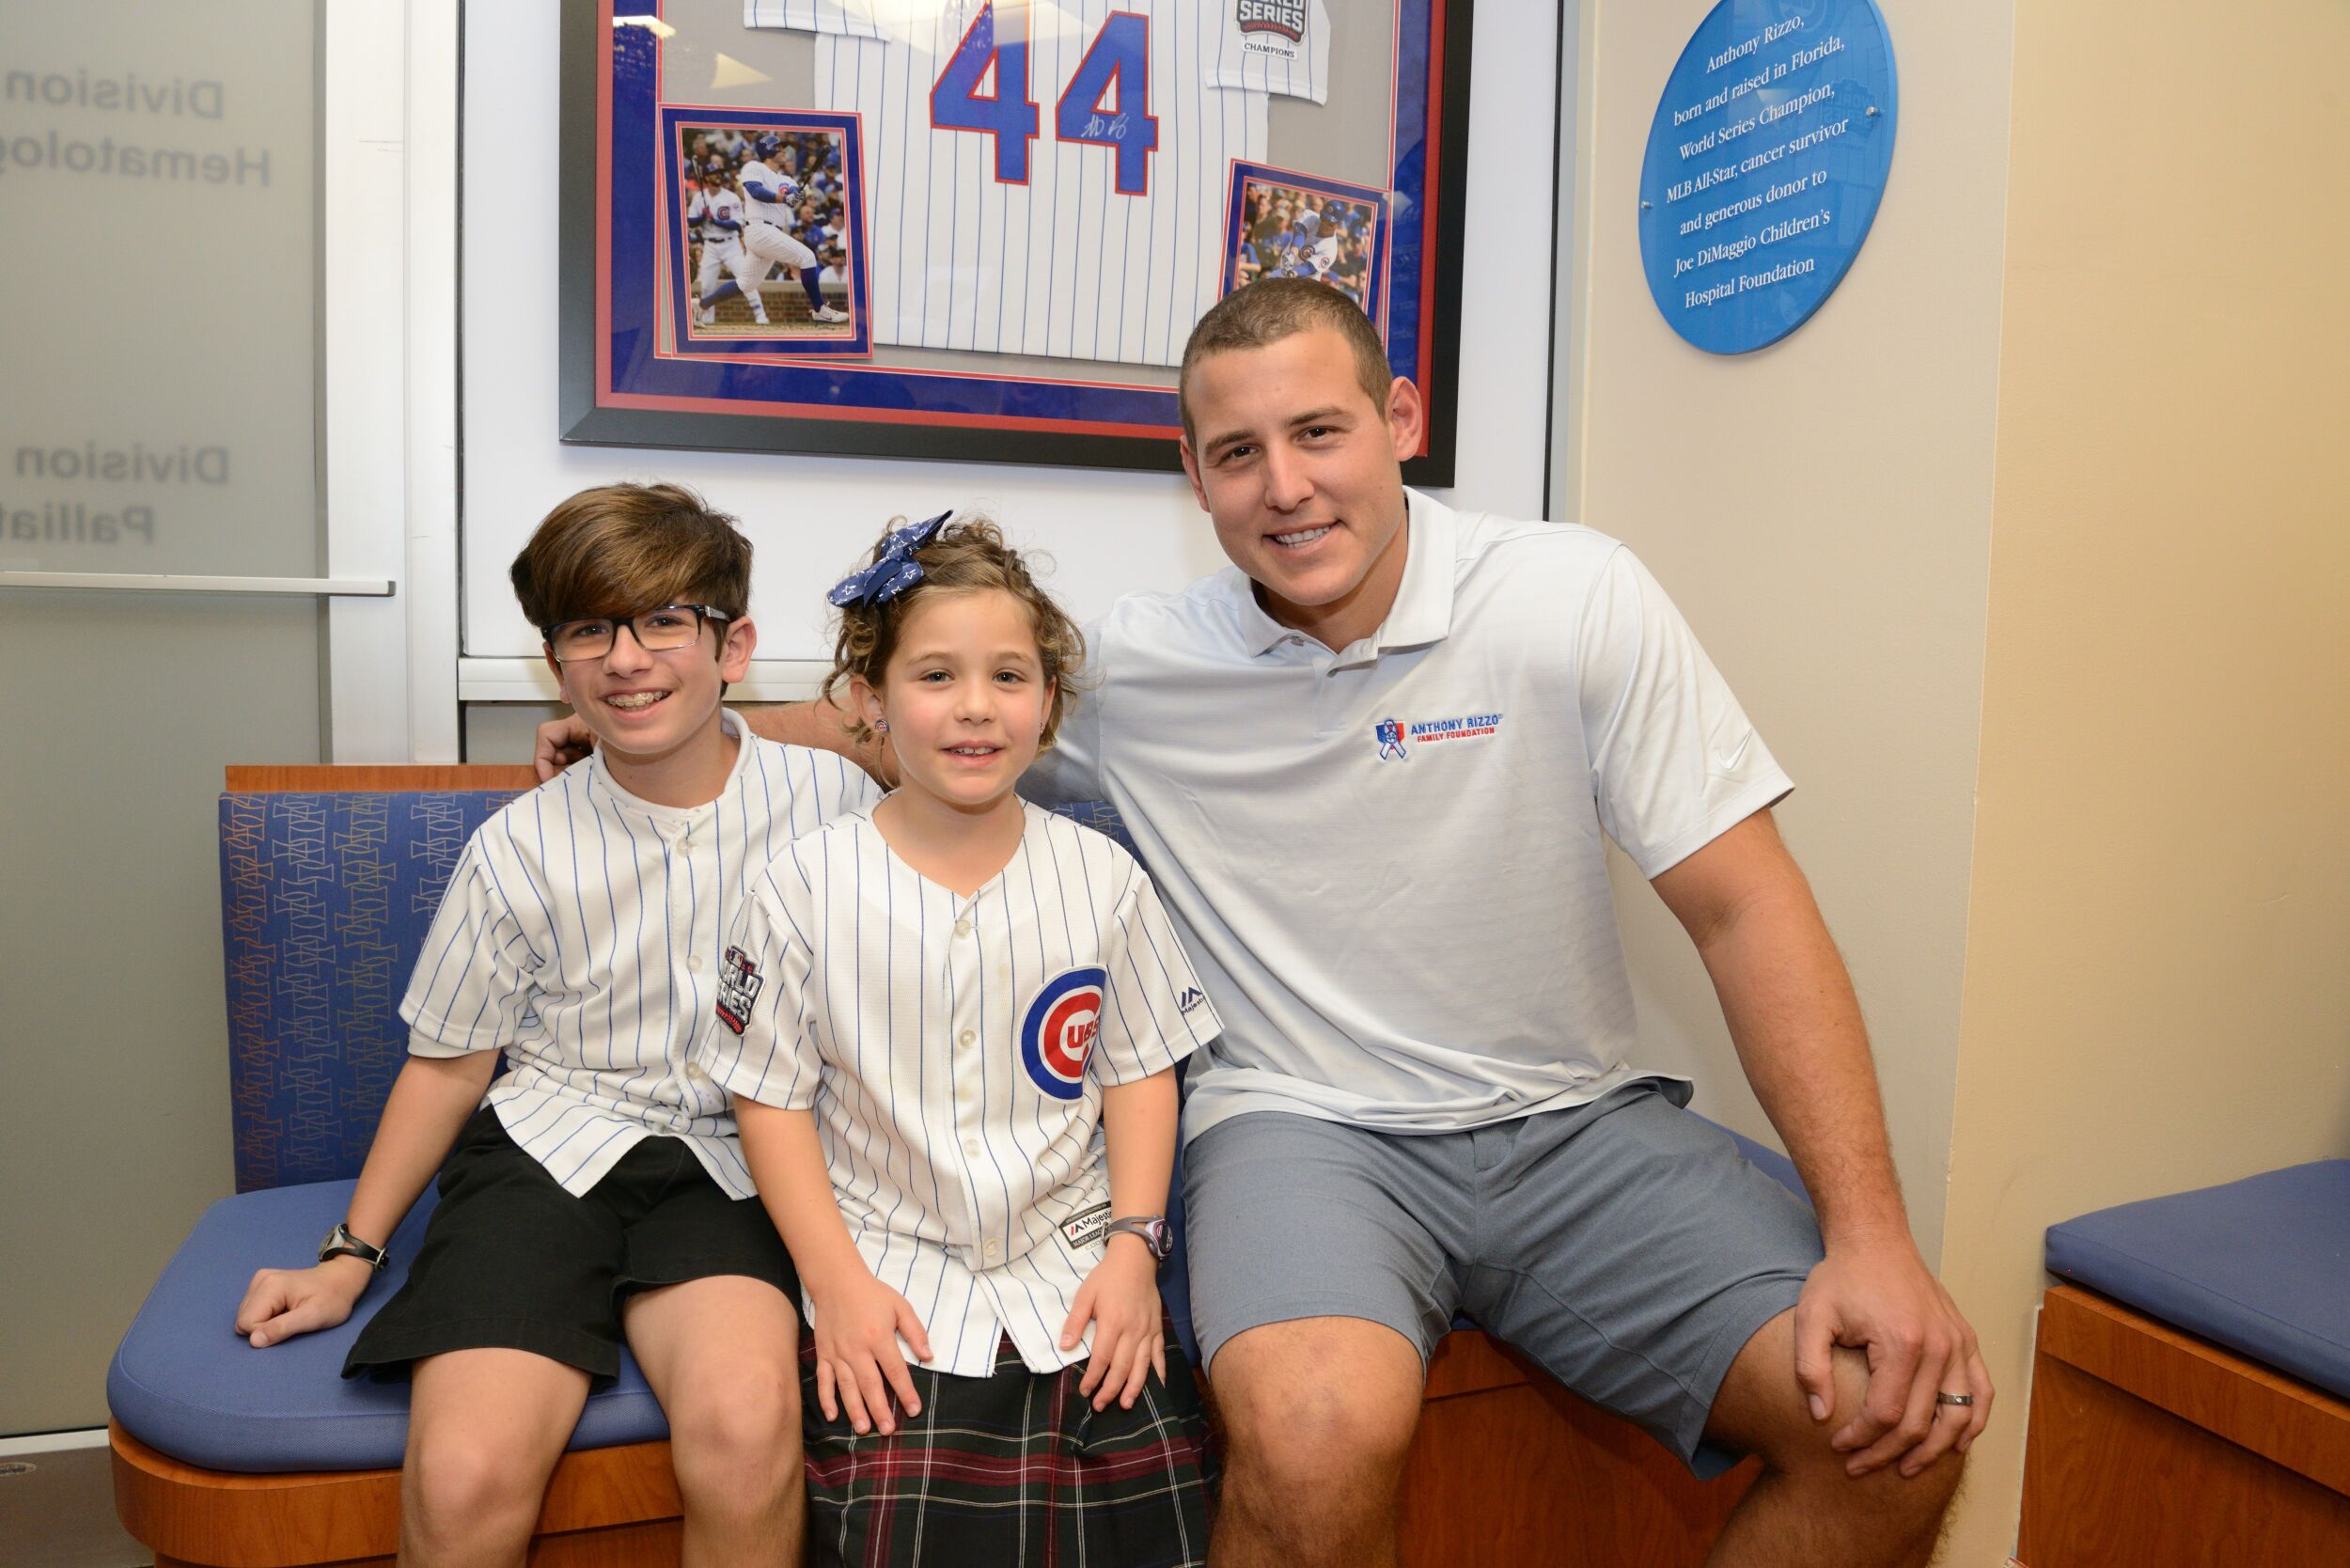 Anthony Rizzo Thanked for $1 million donation, Visits with Cancer Patients  at Joe DiMaggio – Parkland Talk